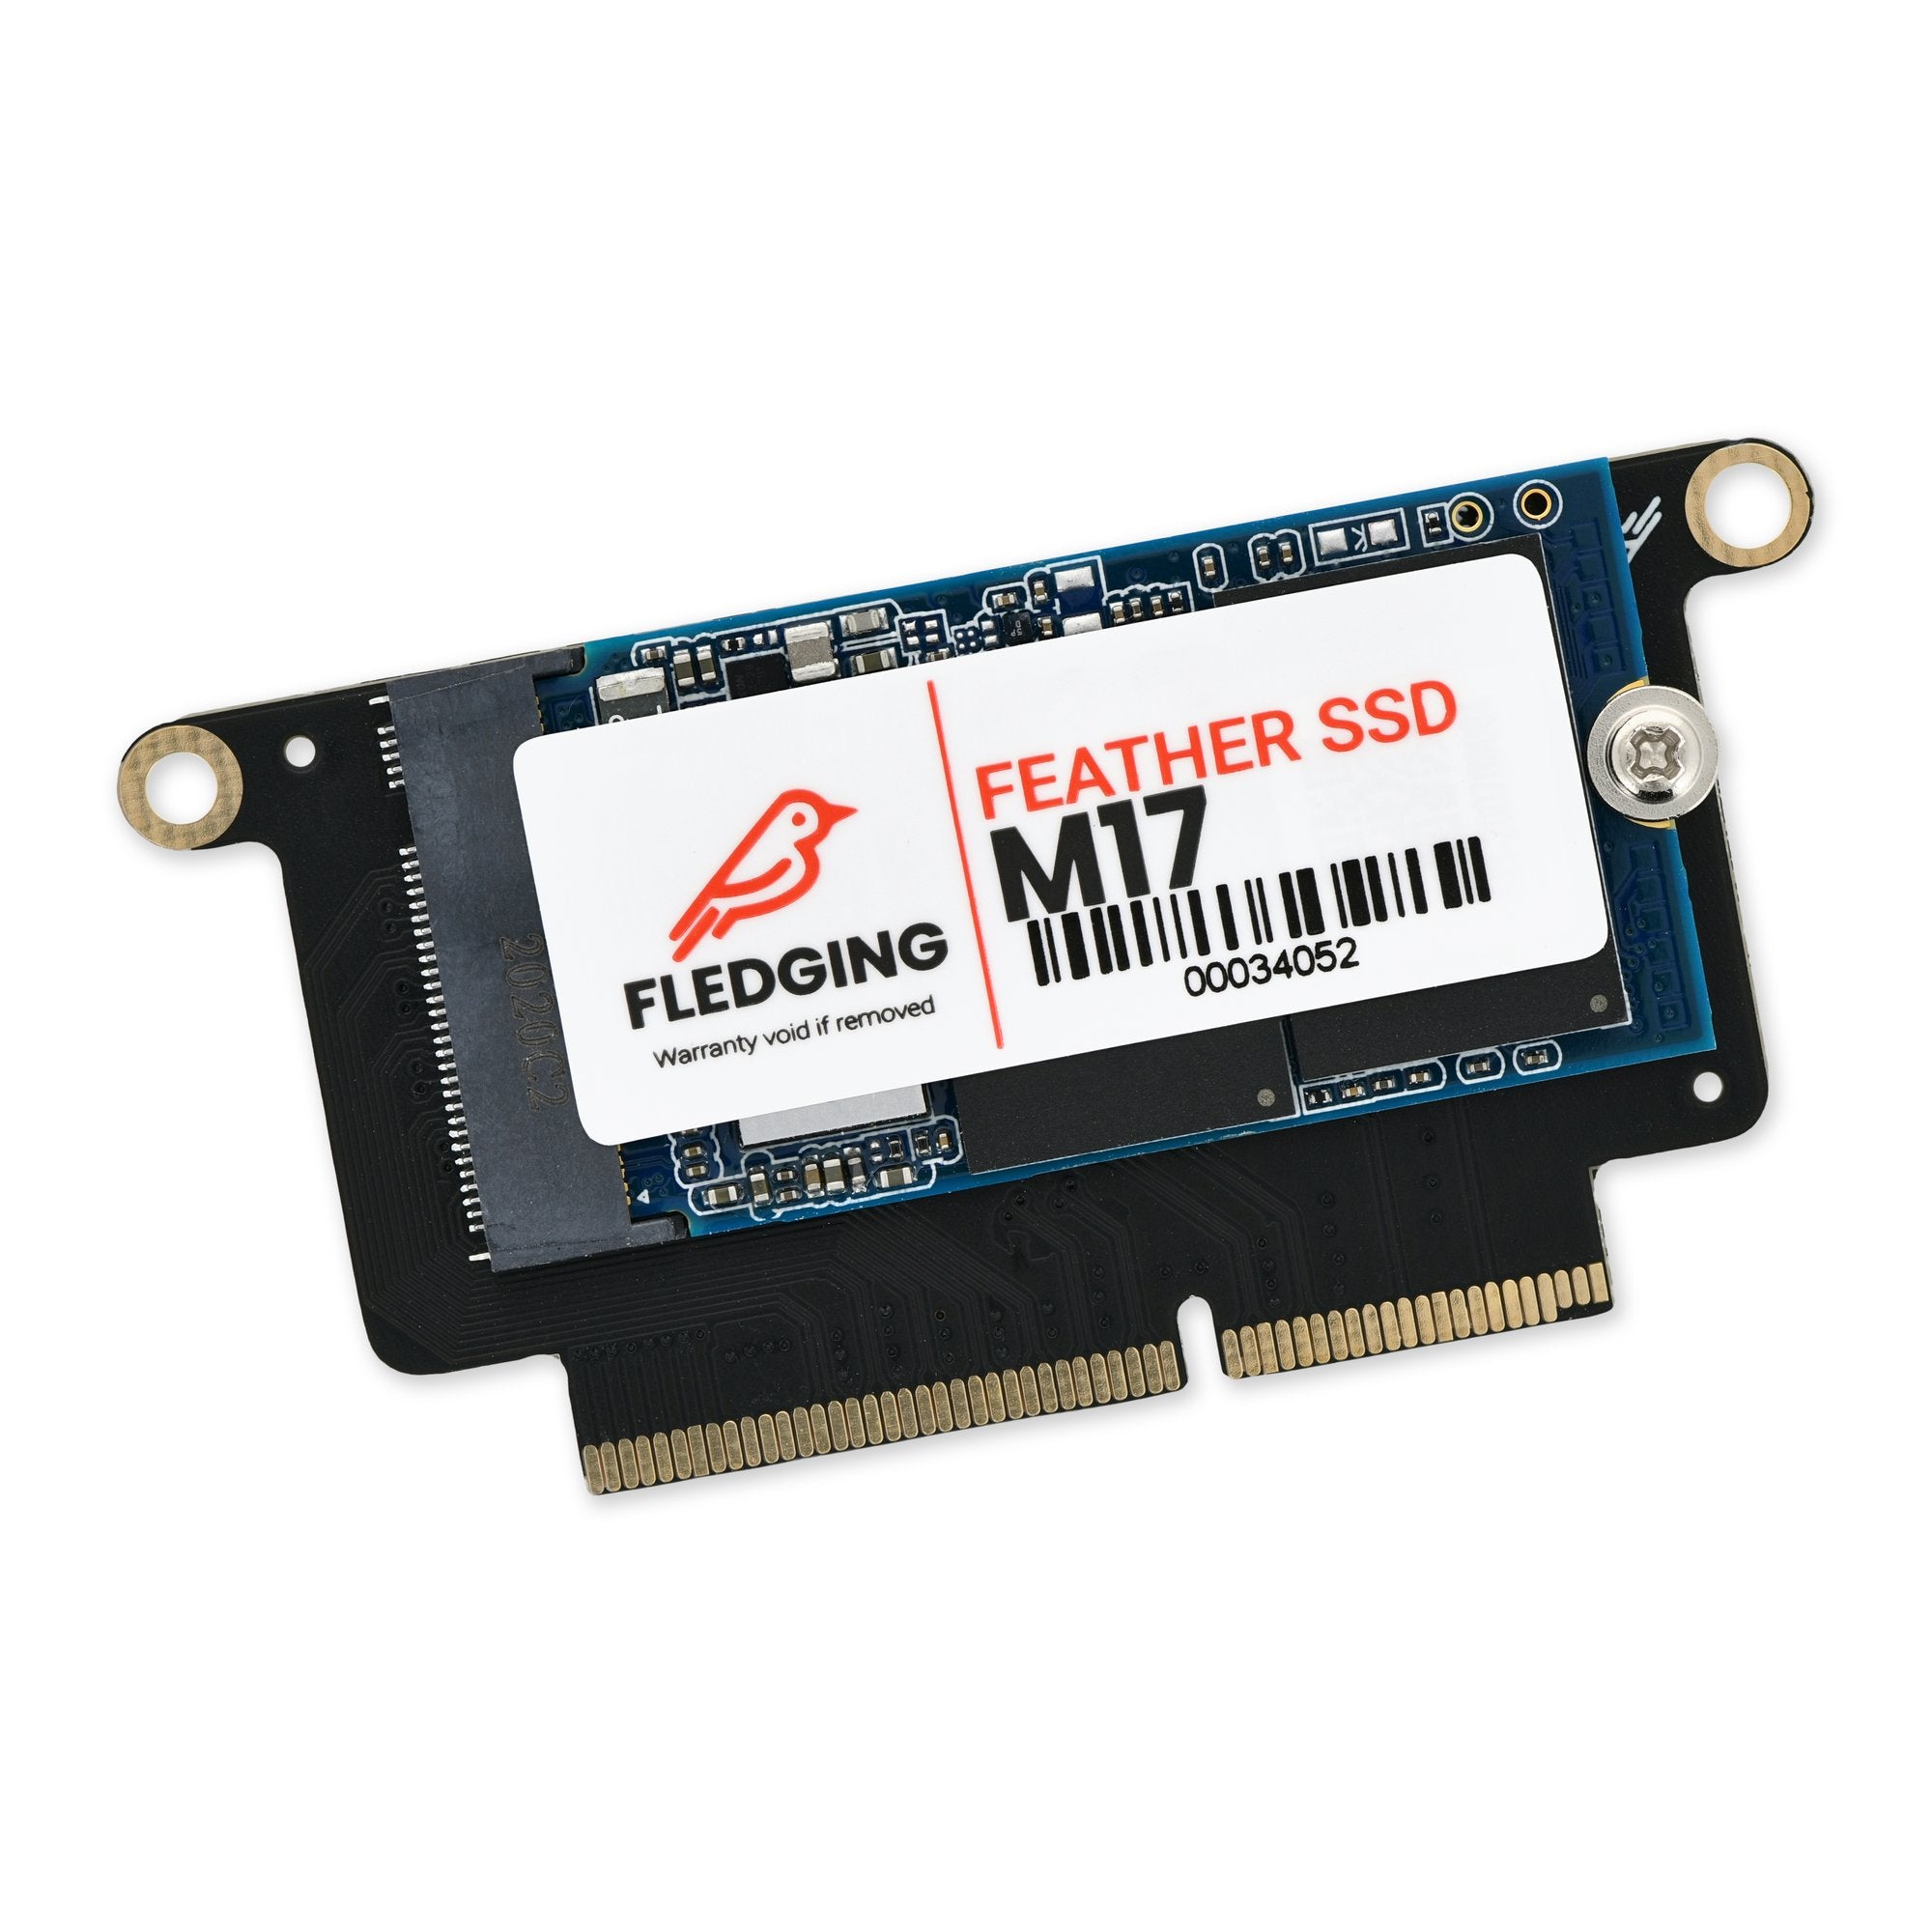 Fledging Feather M17 SSD 2 TB New